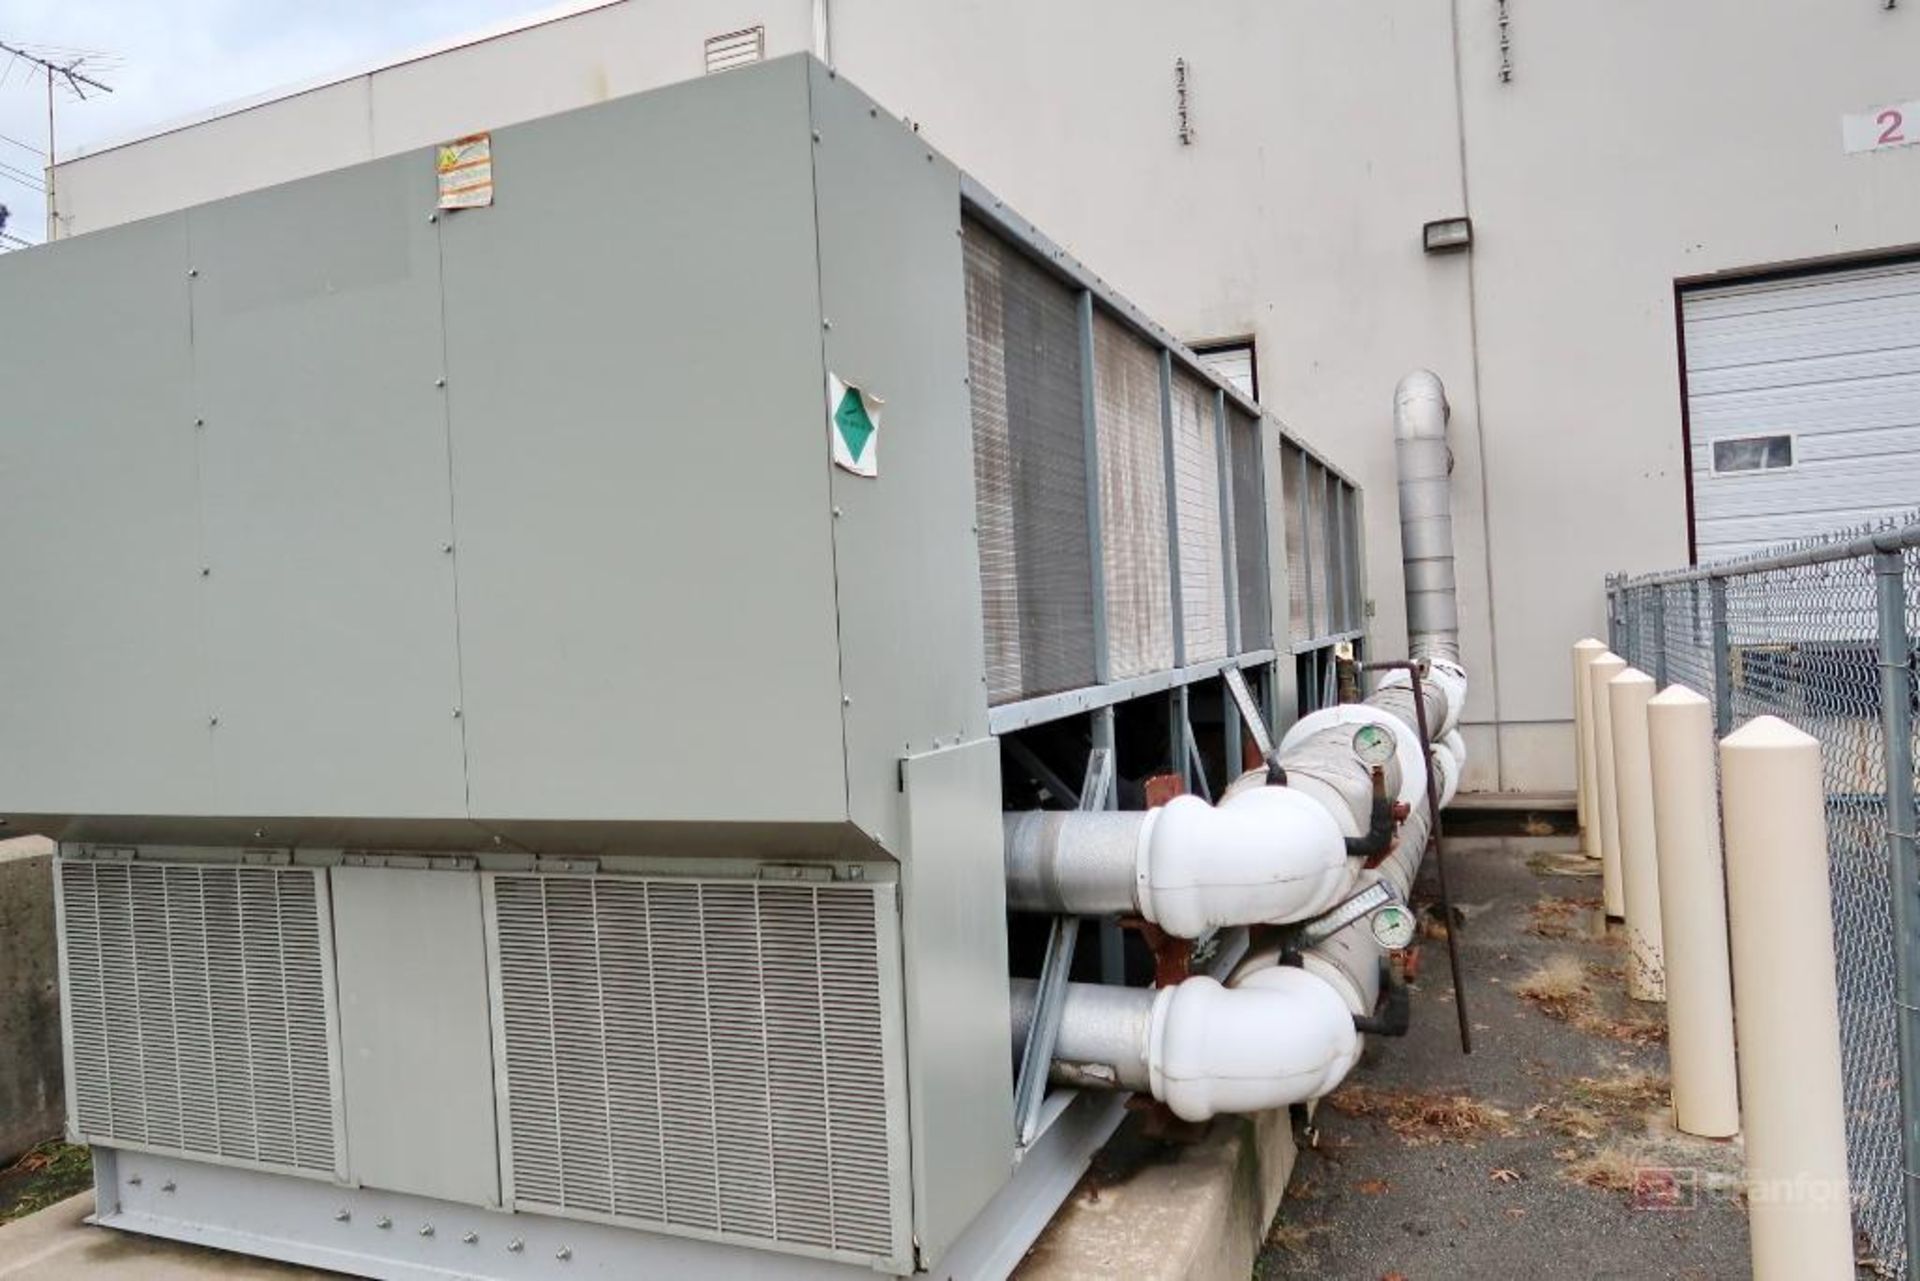 Trane 250-Ton Air Cooled Chiller - Image 4 of 9